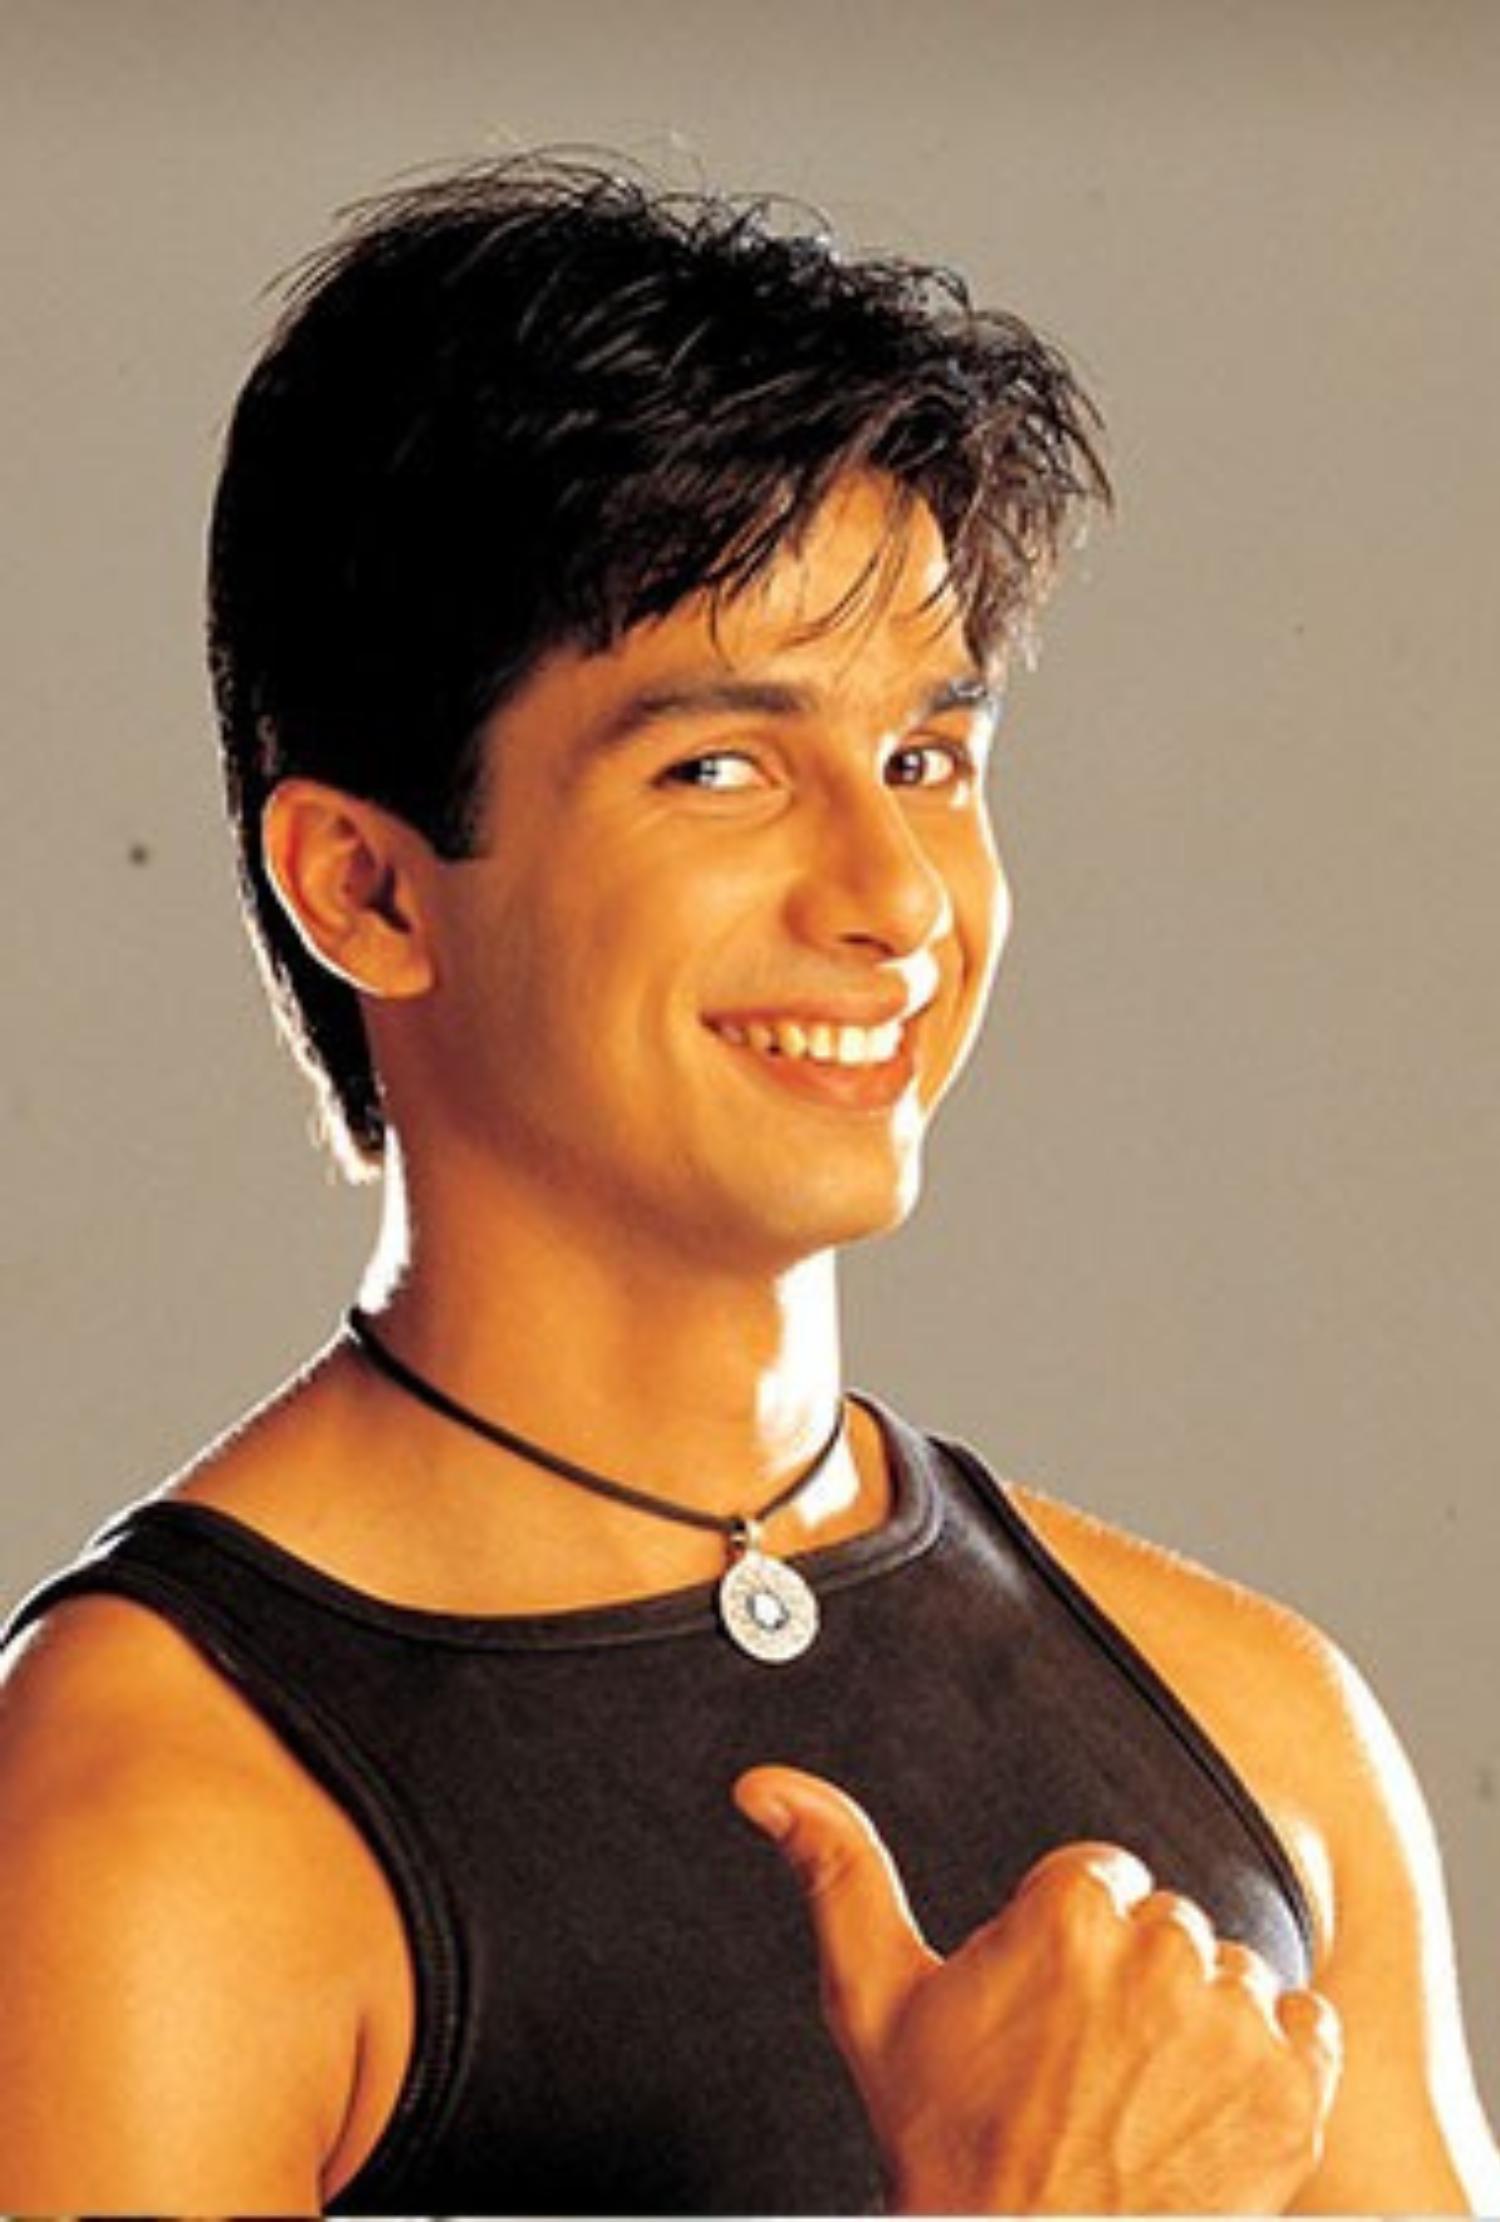 Then: The adorable 'Rajiv' from 'Ishq Vishk' who charmed the audience